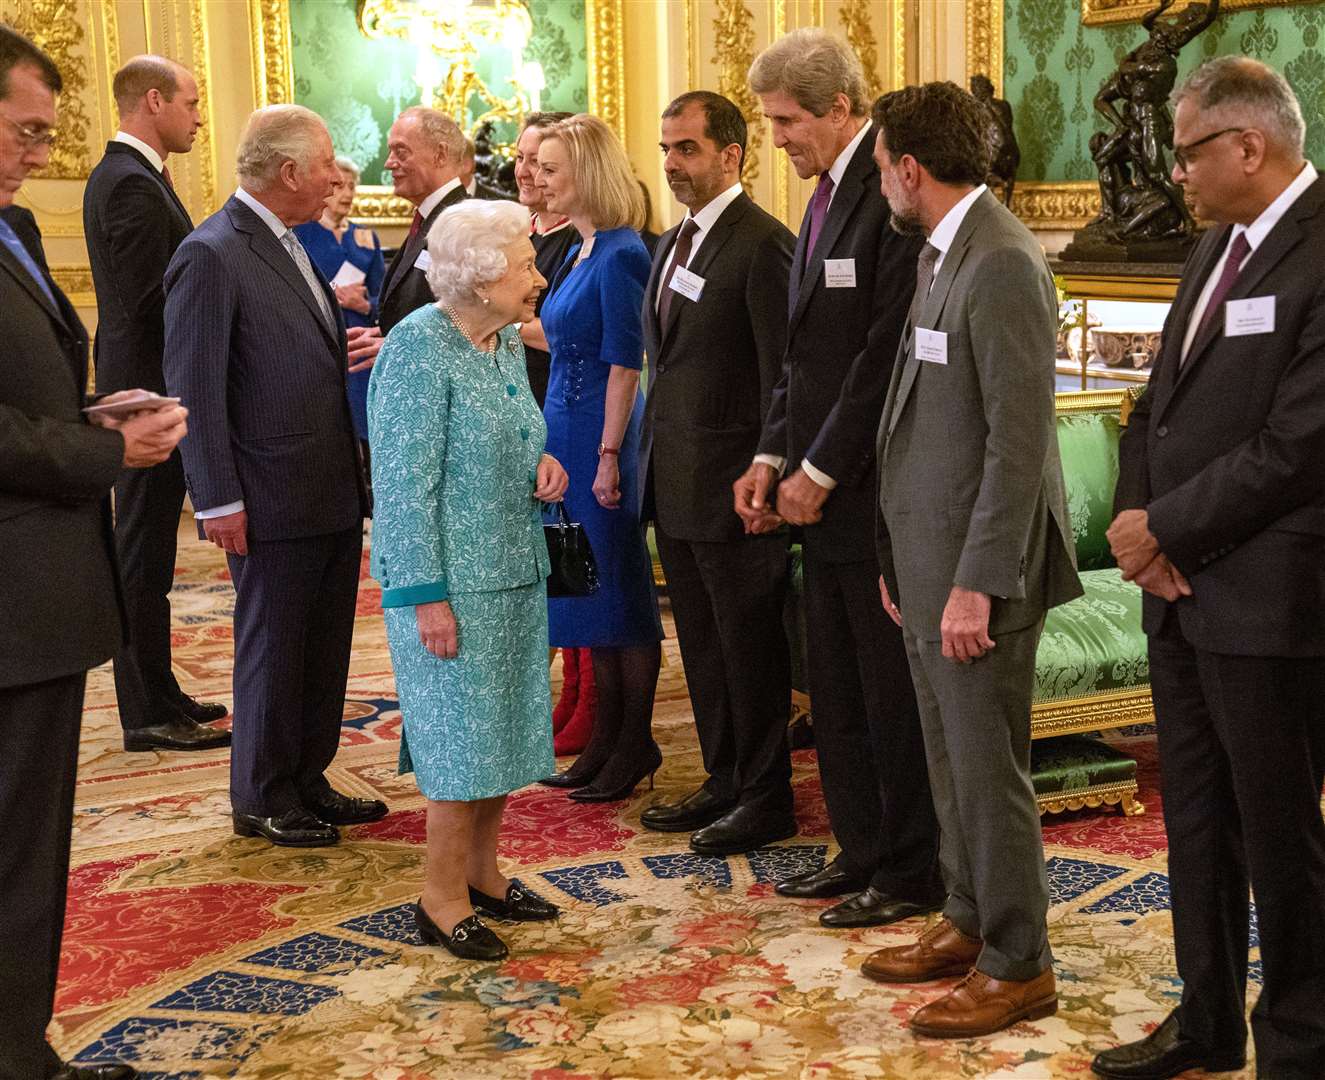 The Queen meeting guests at the Global Investment Summit on Tuesday (Arthur Edwards/The Sun/PA)